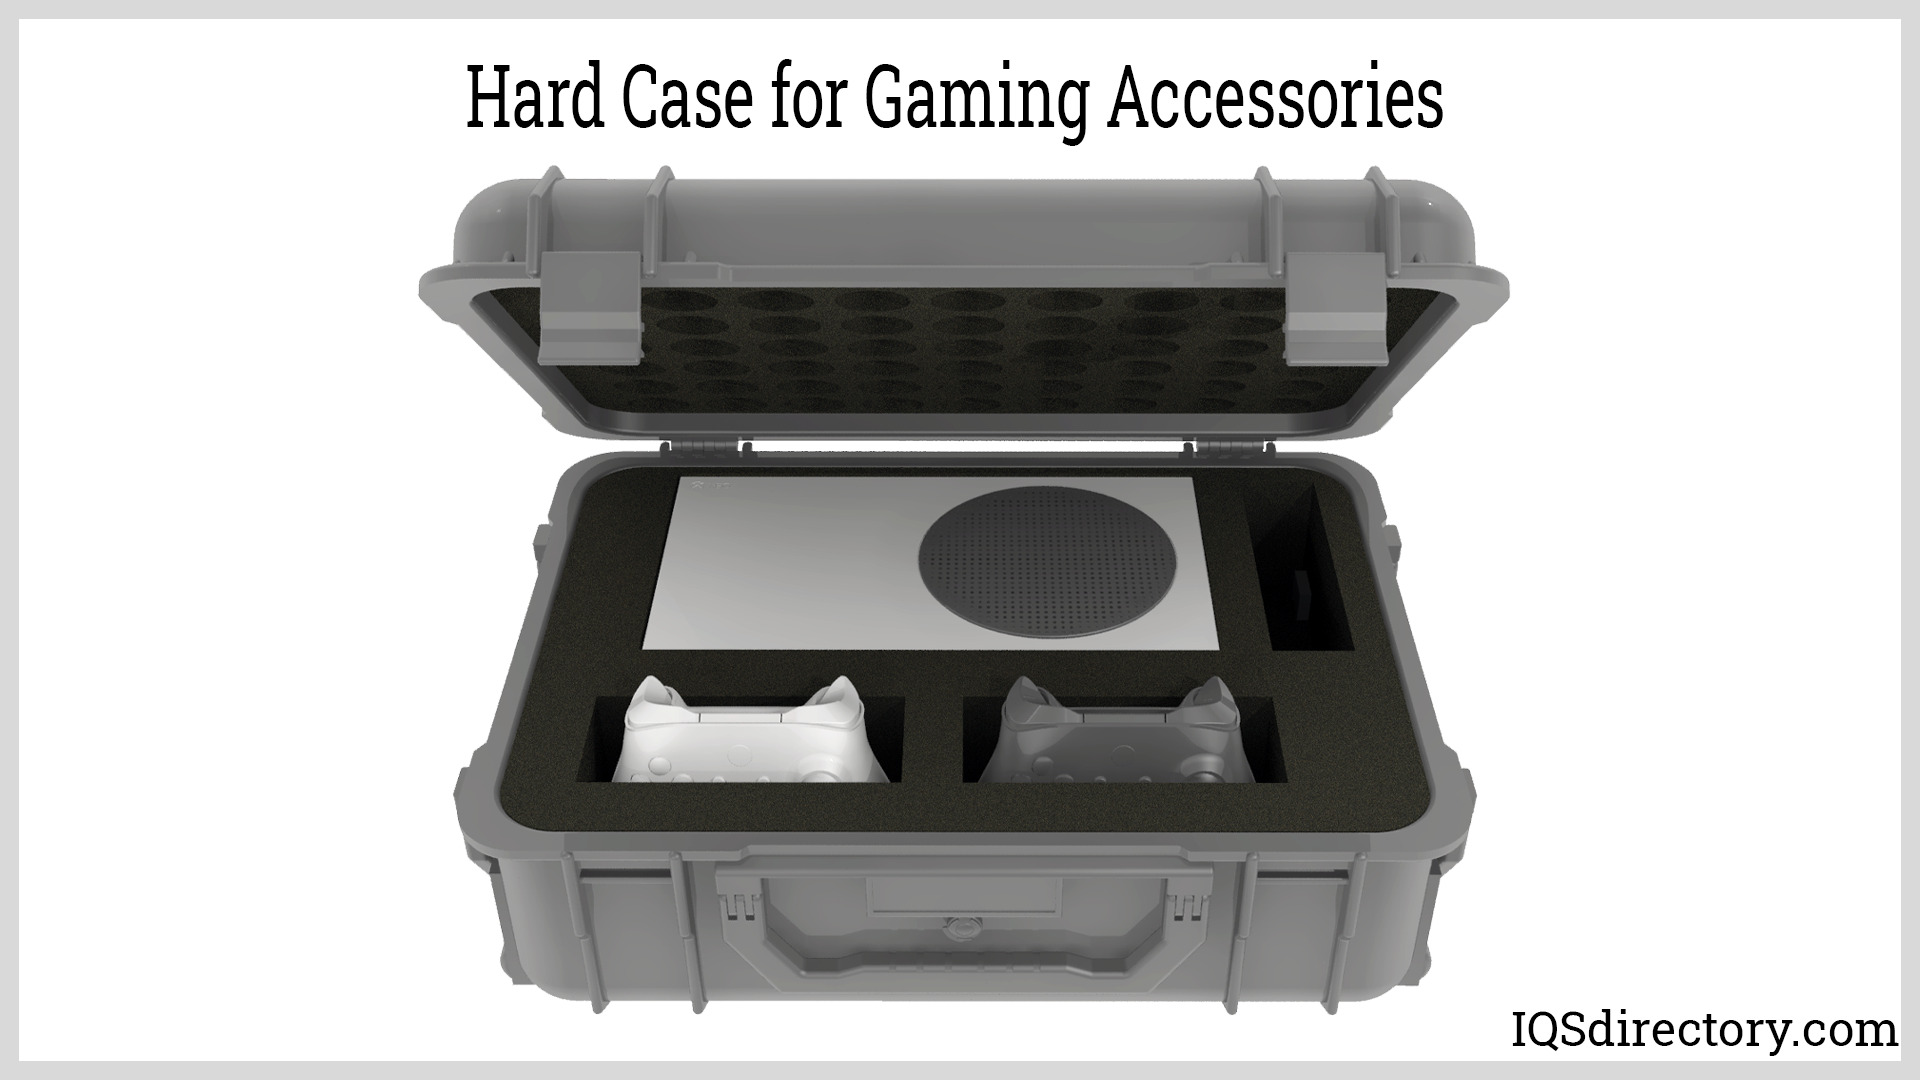 Hard Case for Gaming Accessories